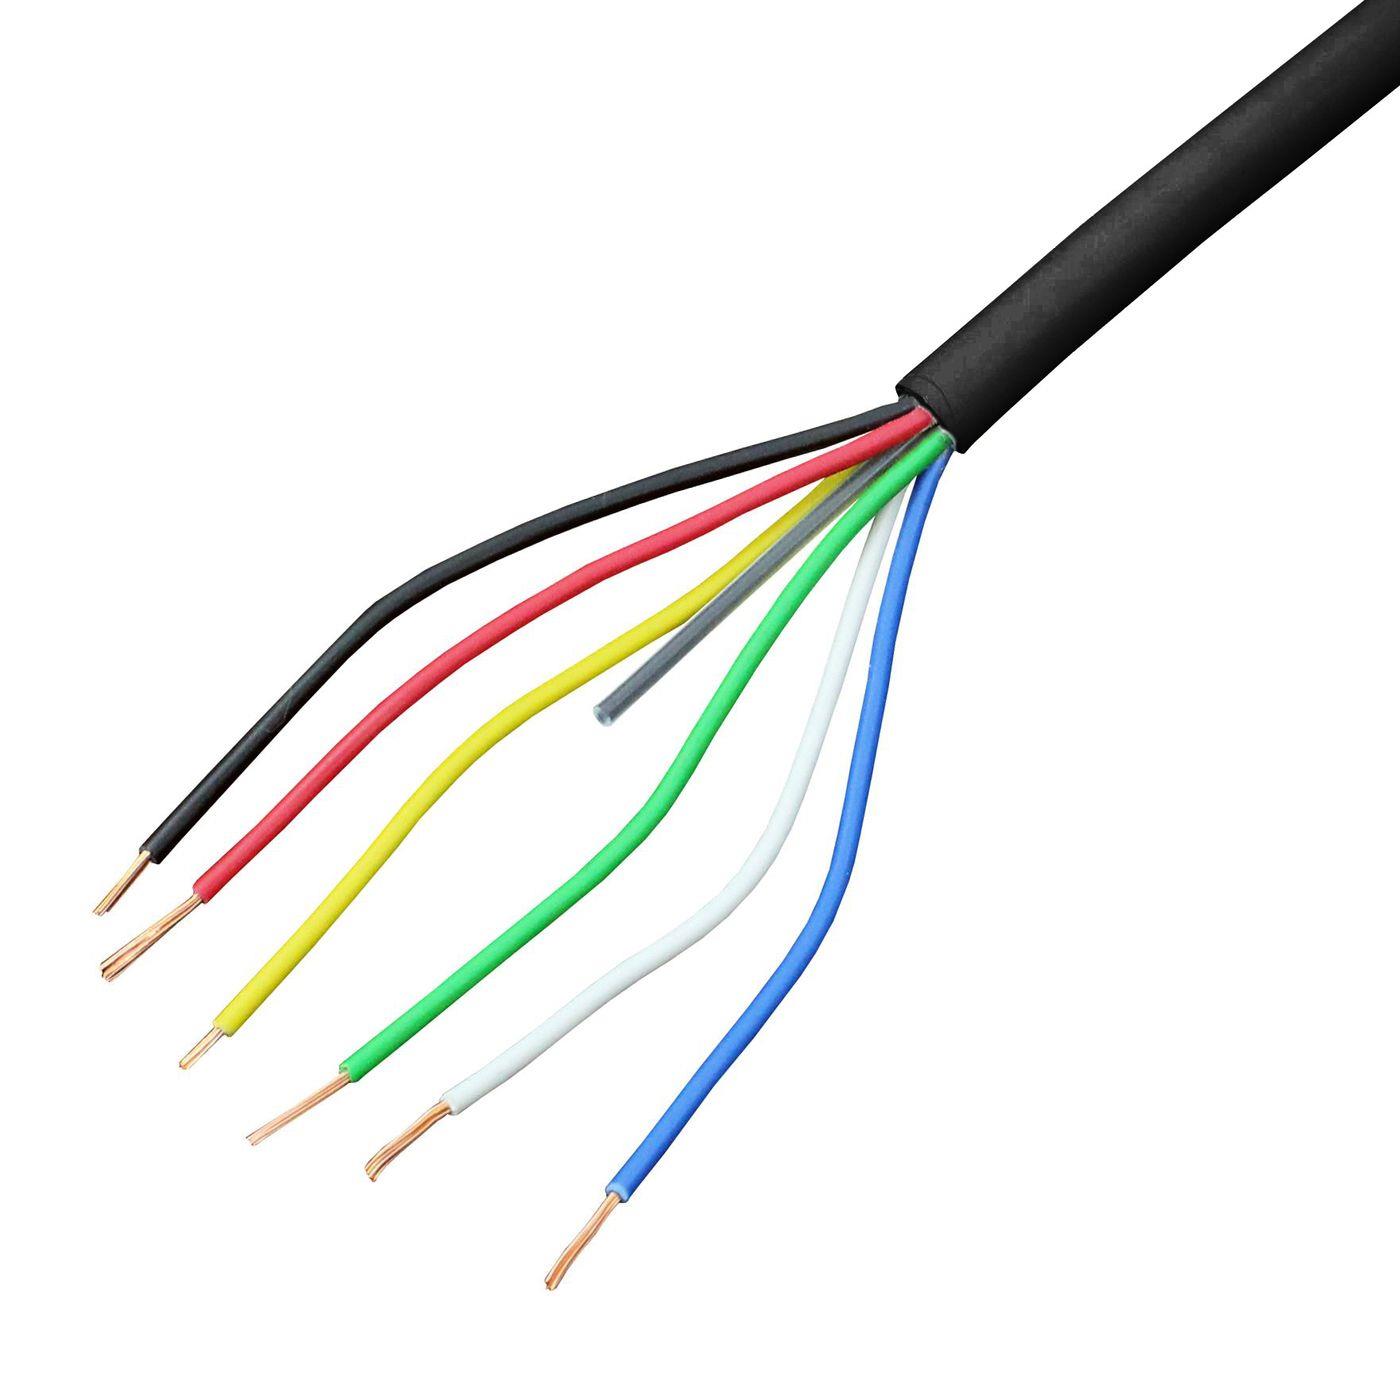 1m RGBW CCT LED Control cable 6x 0,34mm² LiYY Extension 6 wire Power cable Black UV resistant